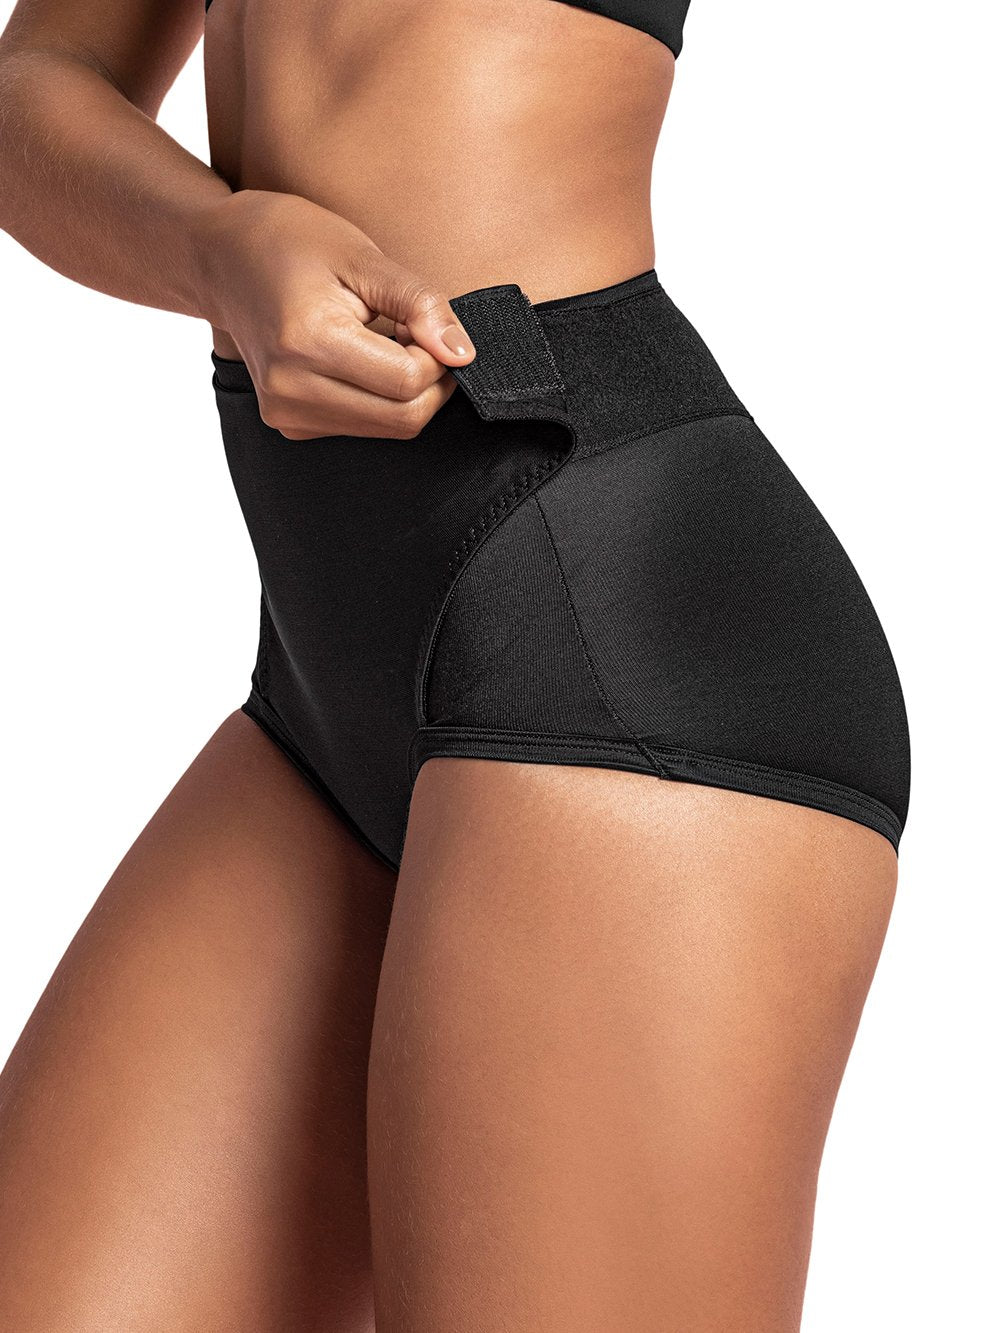 Buy Black Super High Waist Briefs Firm Tummy Control Shaping Briefs from  the Next UK online shop